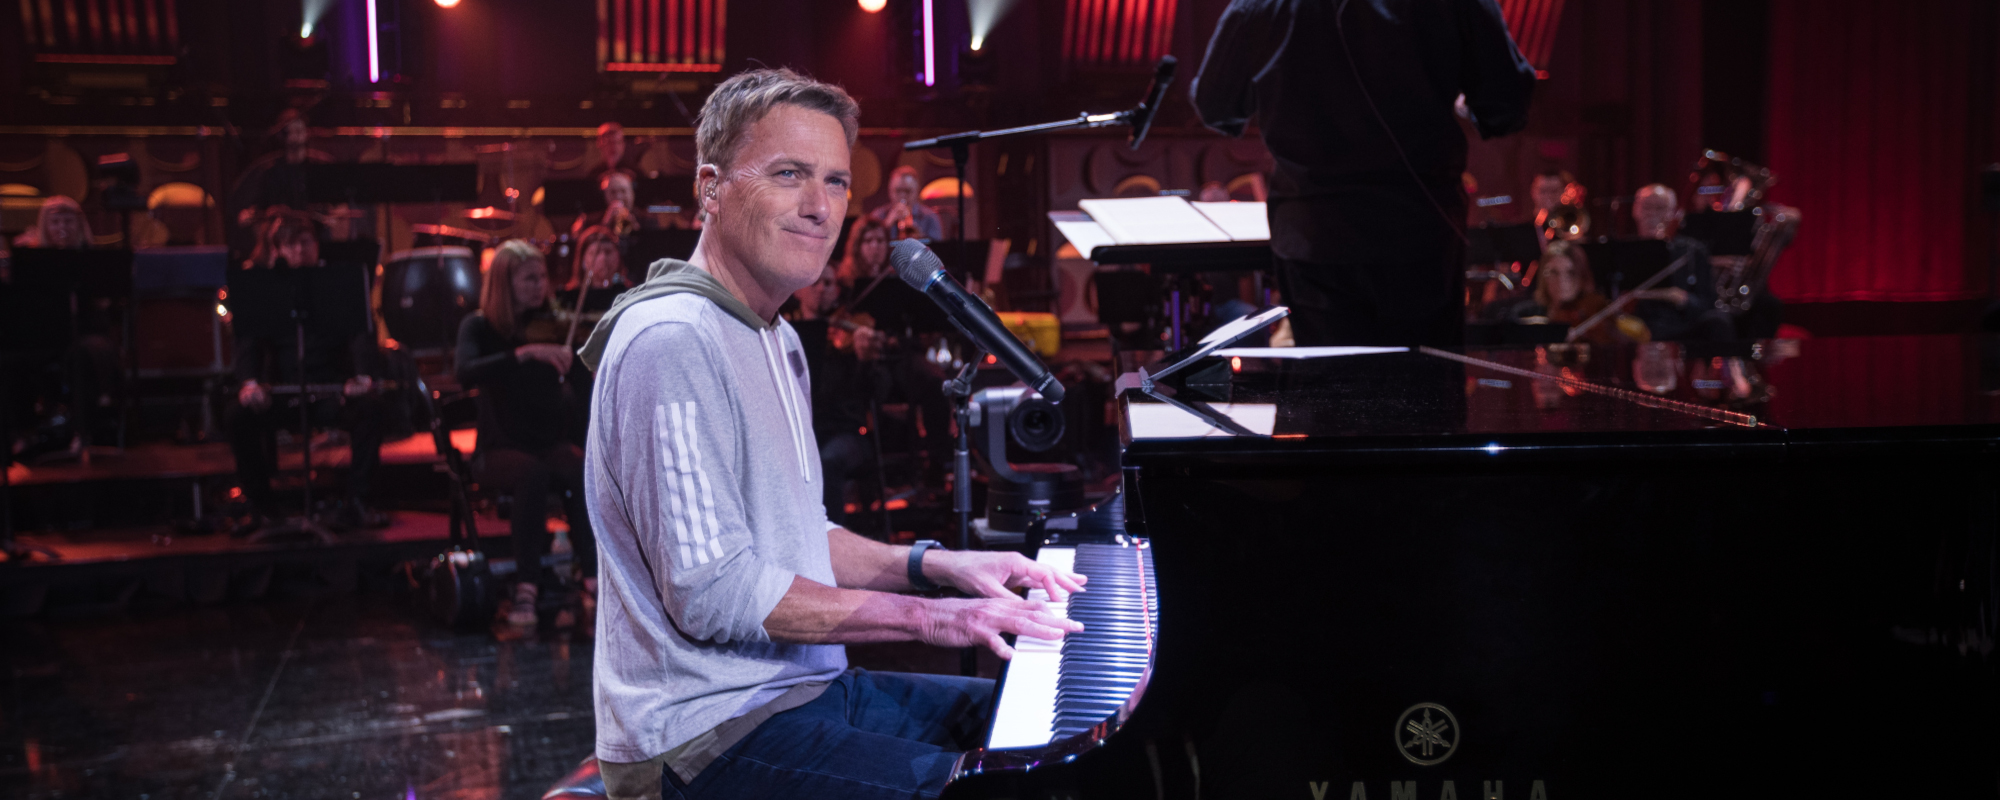 Michael W. Smith Releases Reimagined No. 1 Record “Worship Forever” on 20th anniversary